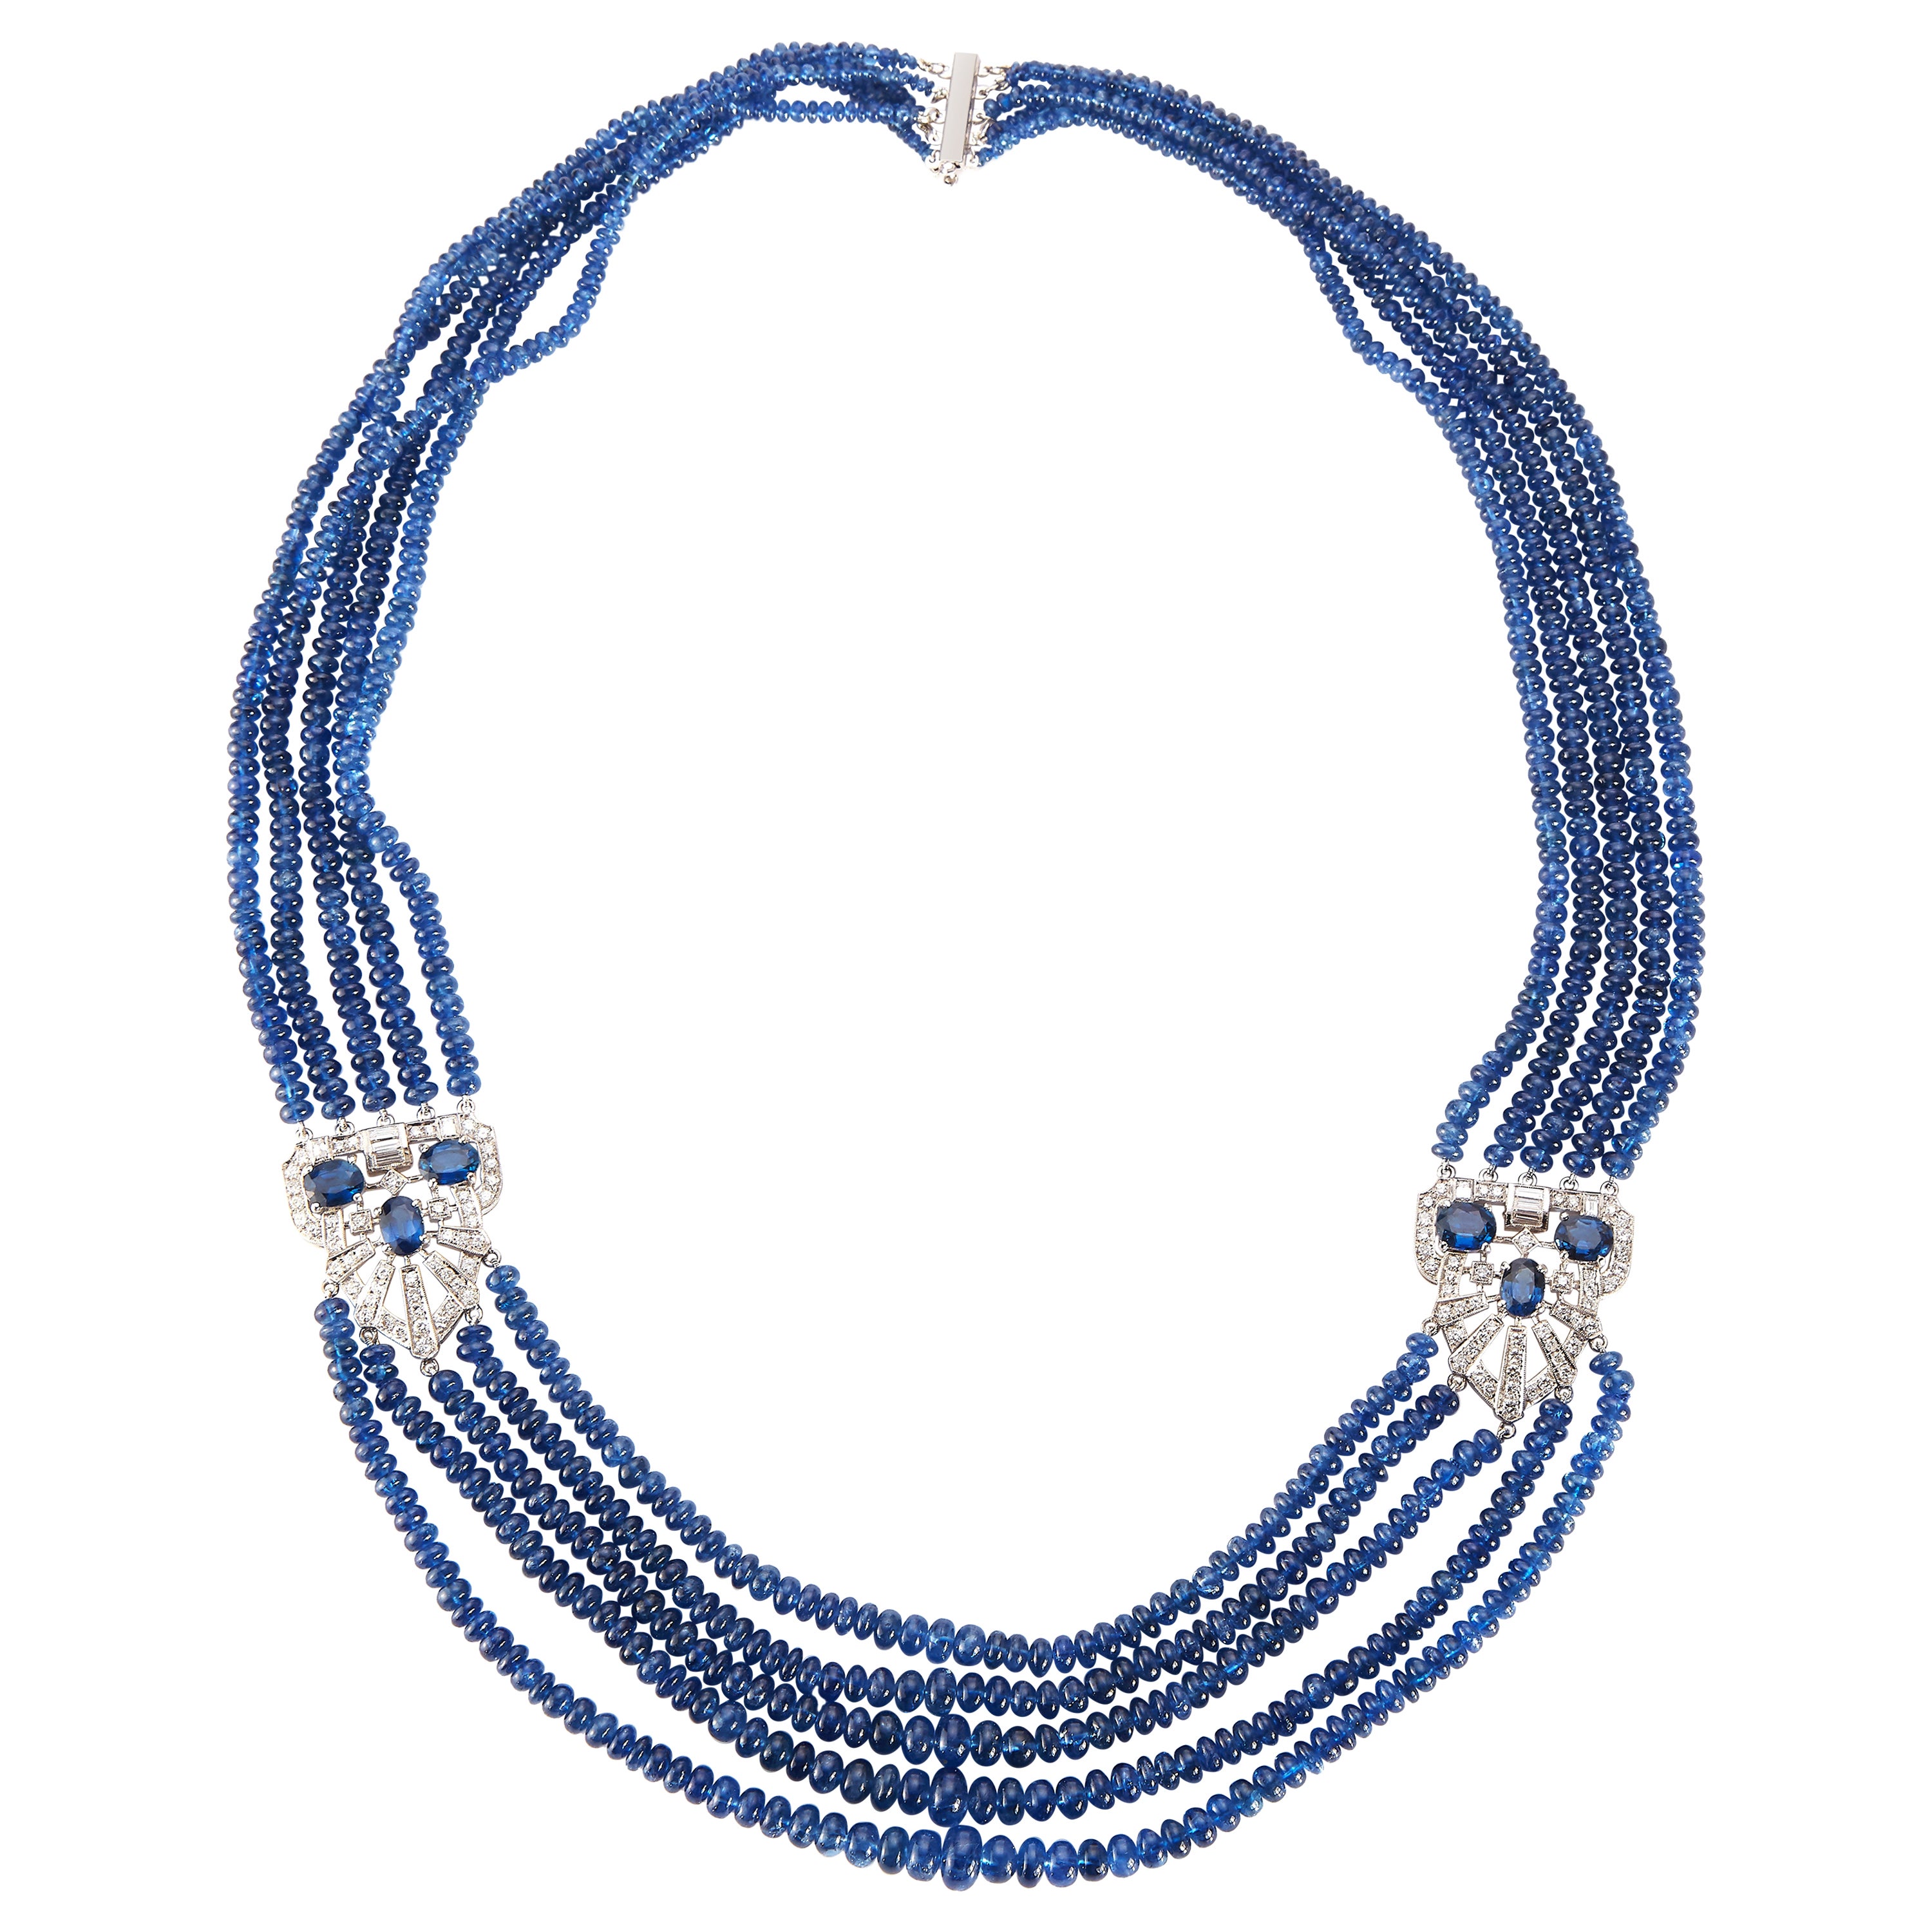 594.00 Cts Earth Mined 2 Line Rich Blue Sapphire Pear Beads Hand Made Necklace 